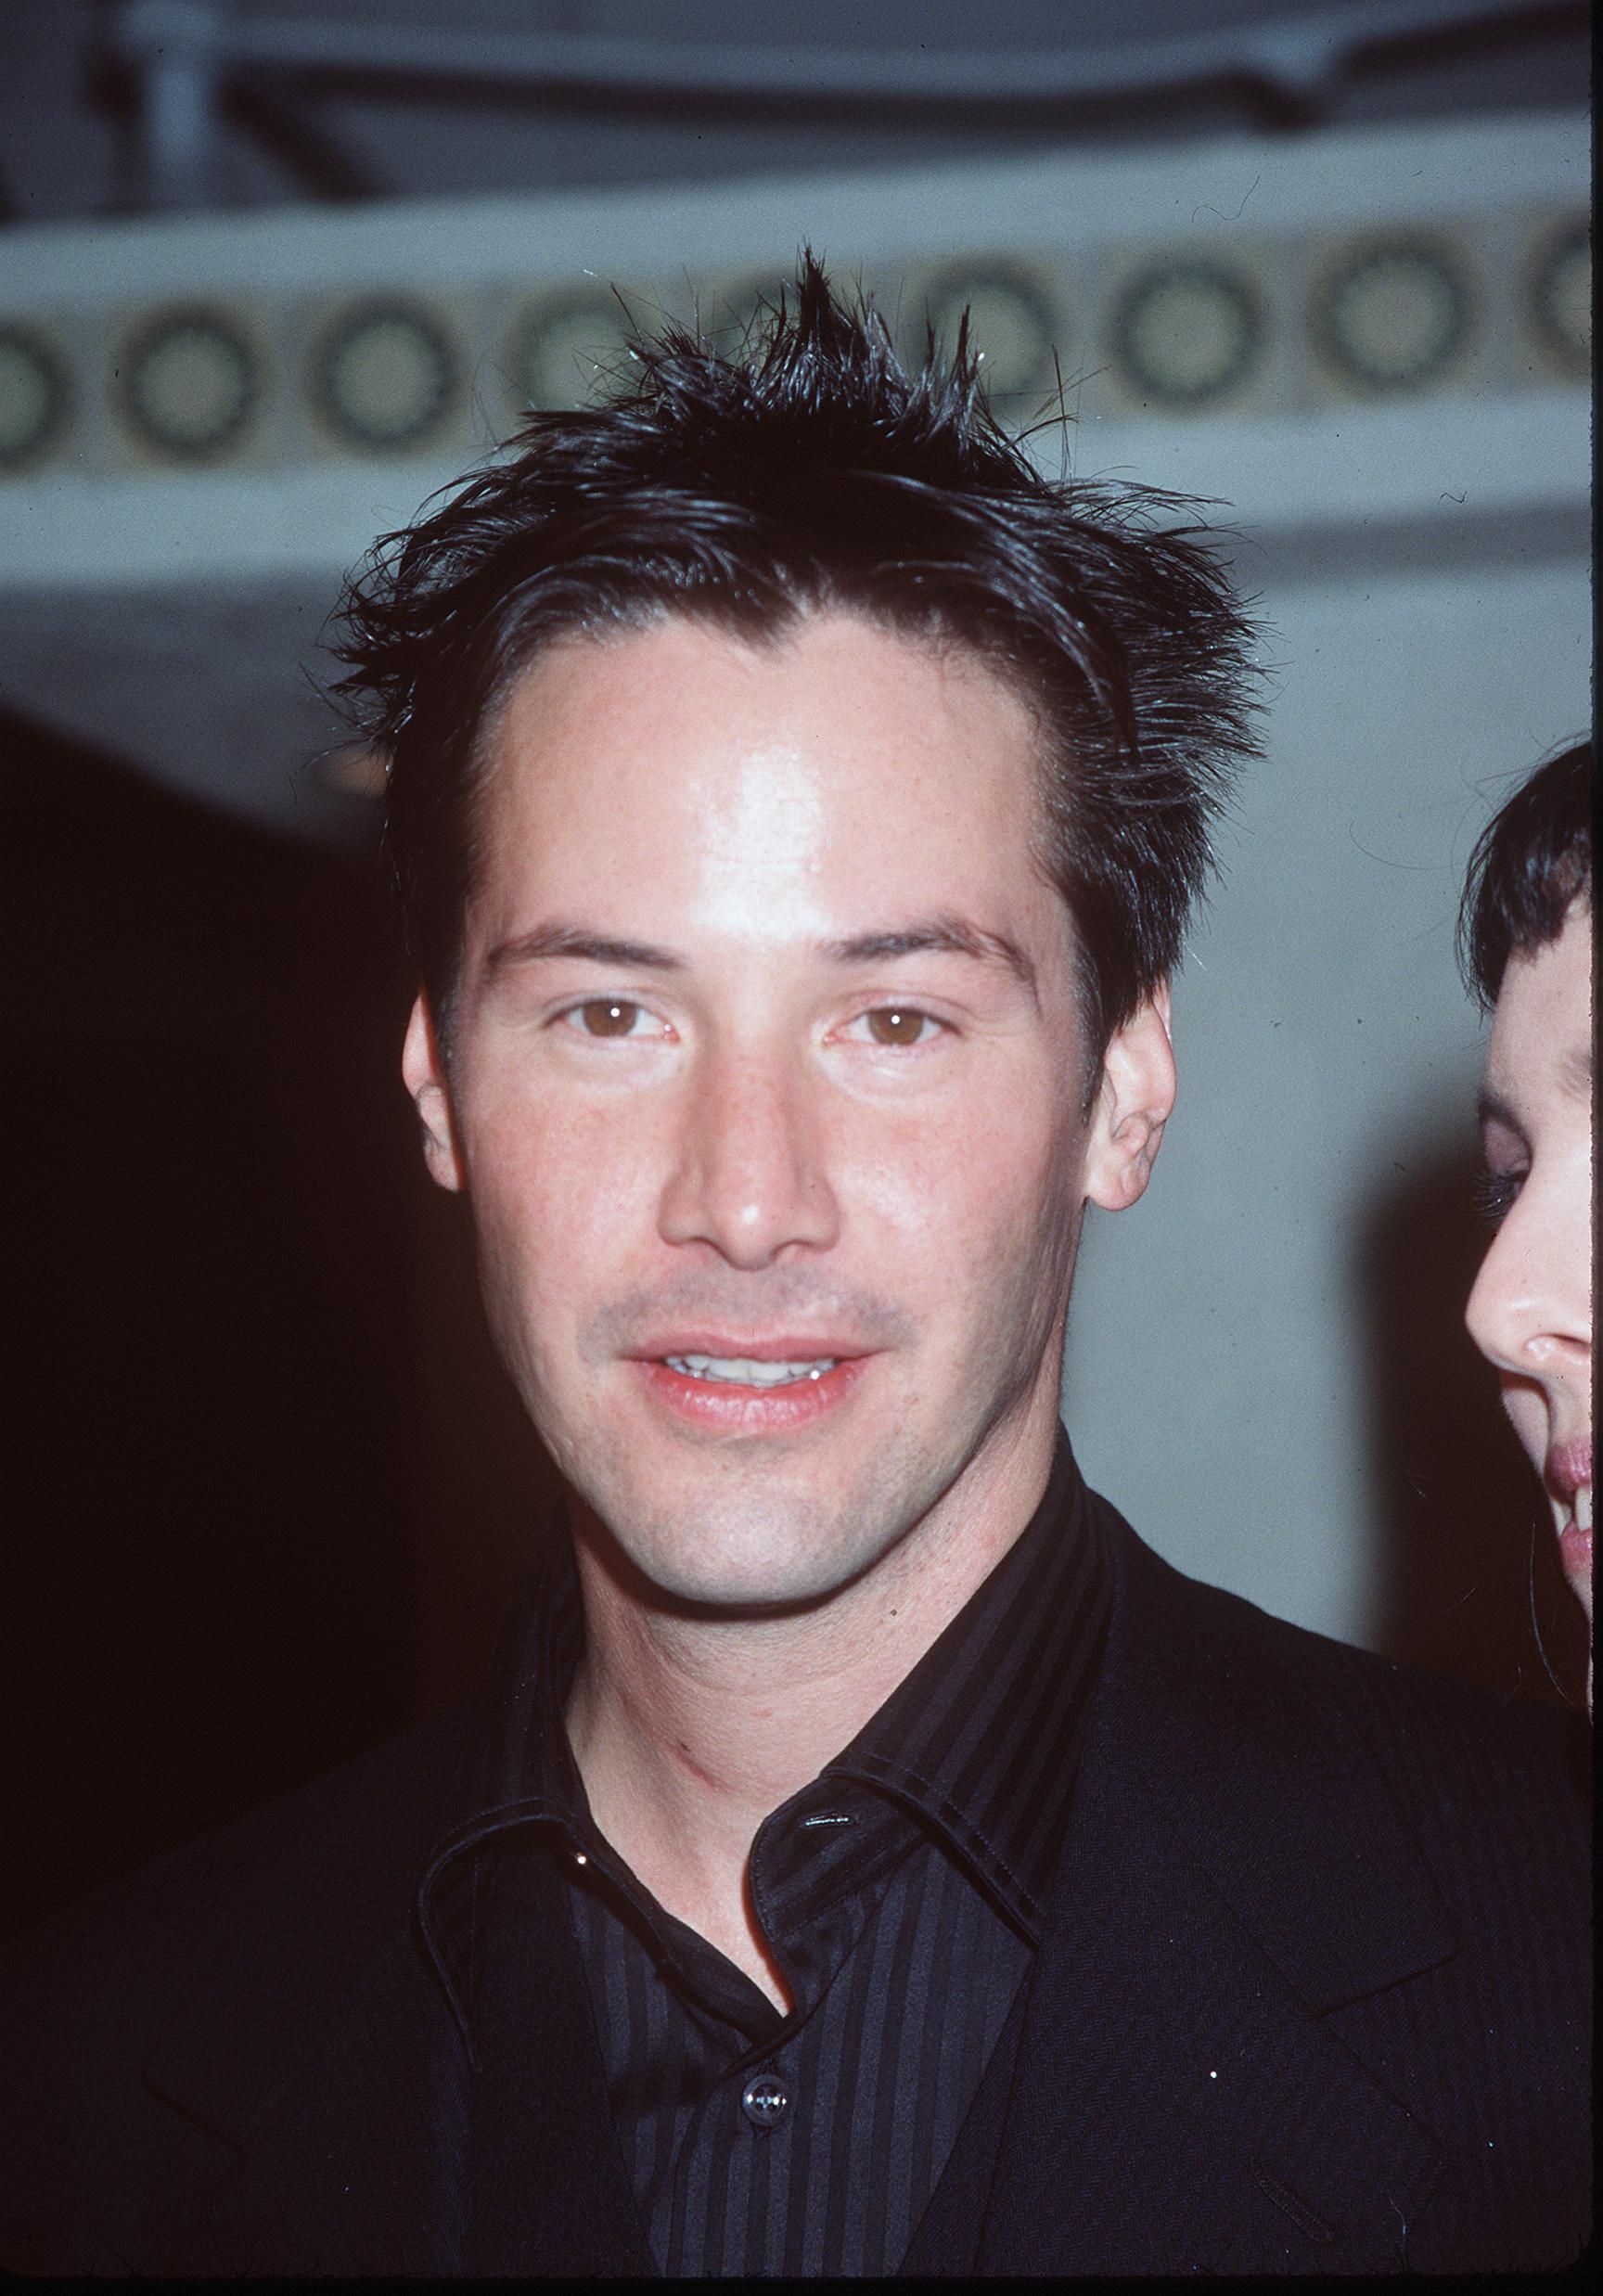 Keanu Reeves at the world premiere showing of "The Matrix" at the Mann's Village Theatre on March 24, 1999, in Westwood, California. | Photo: Getty Images